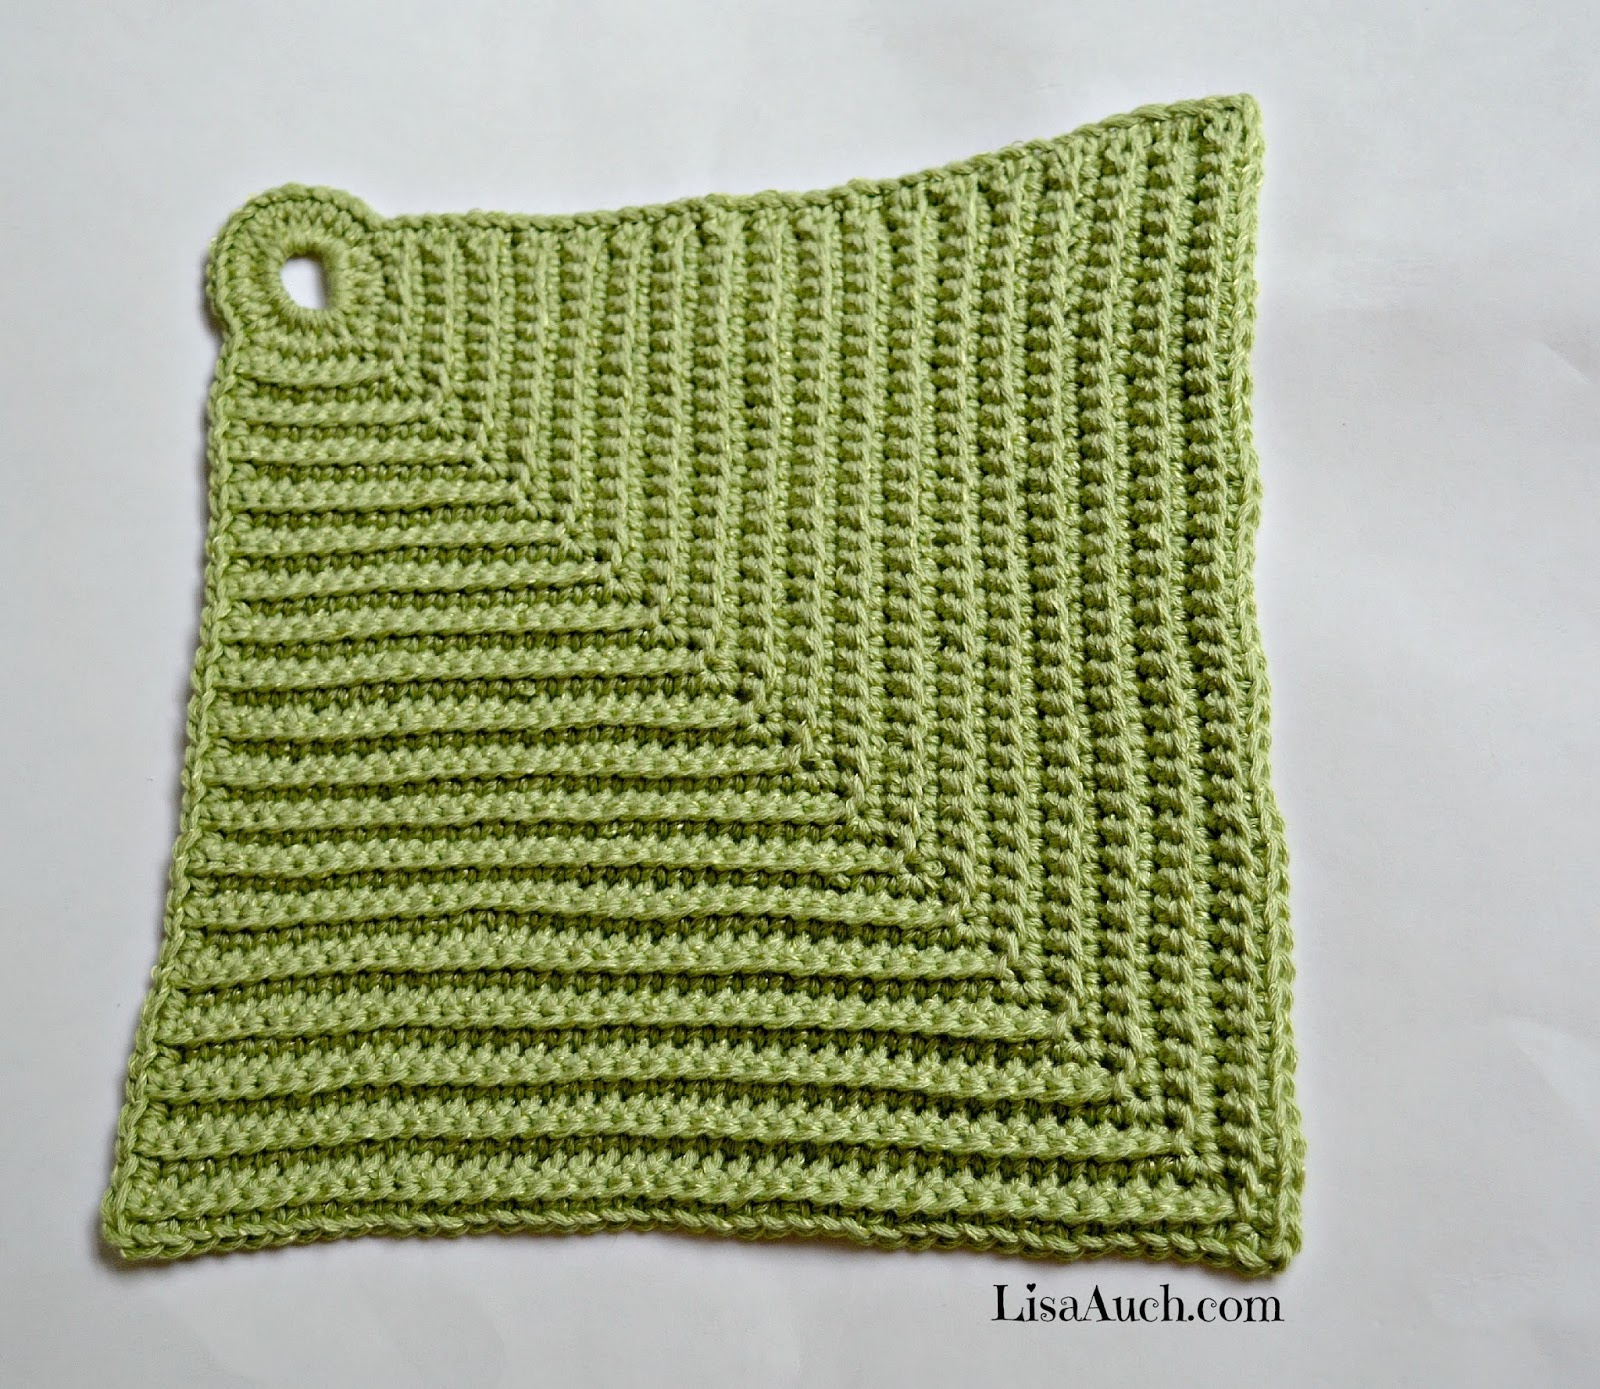 Free Crochet Patterns For Dishcloths Free Crochet Patterns And Designs Lisaauch Free Easy Crochet